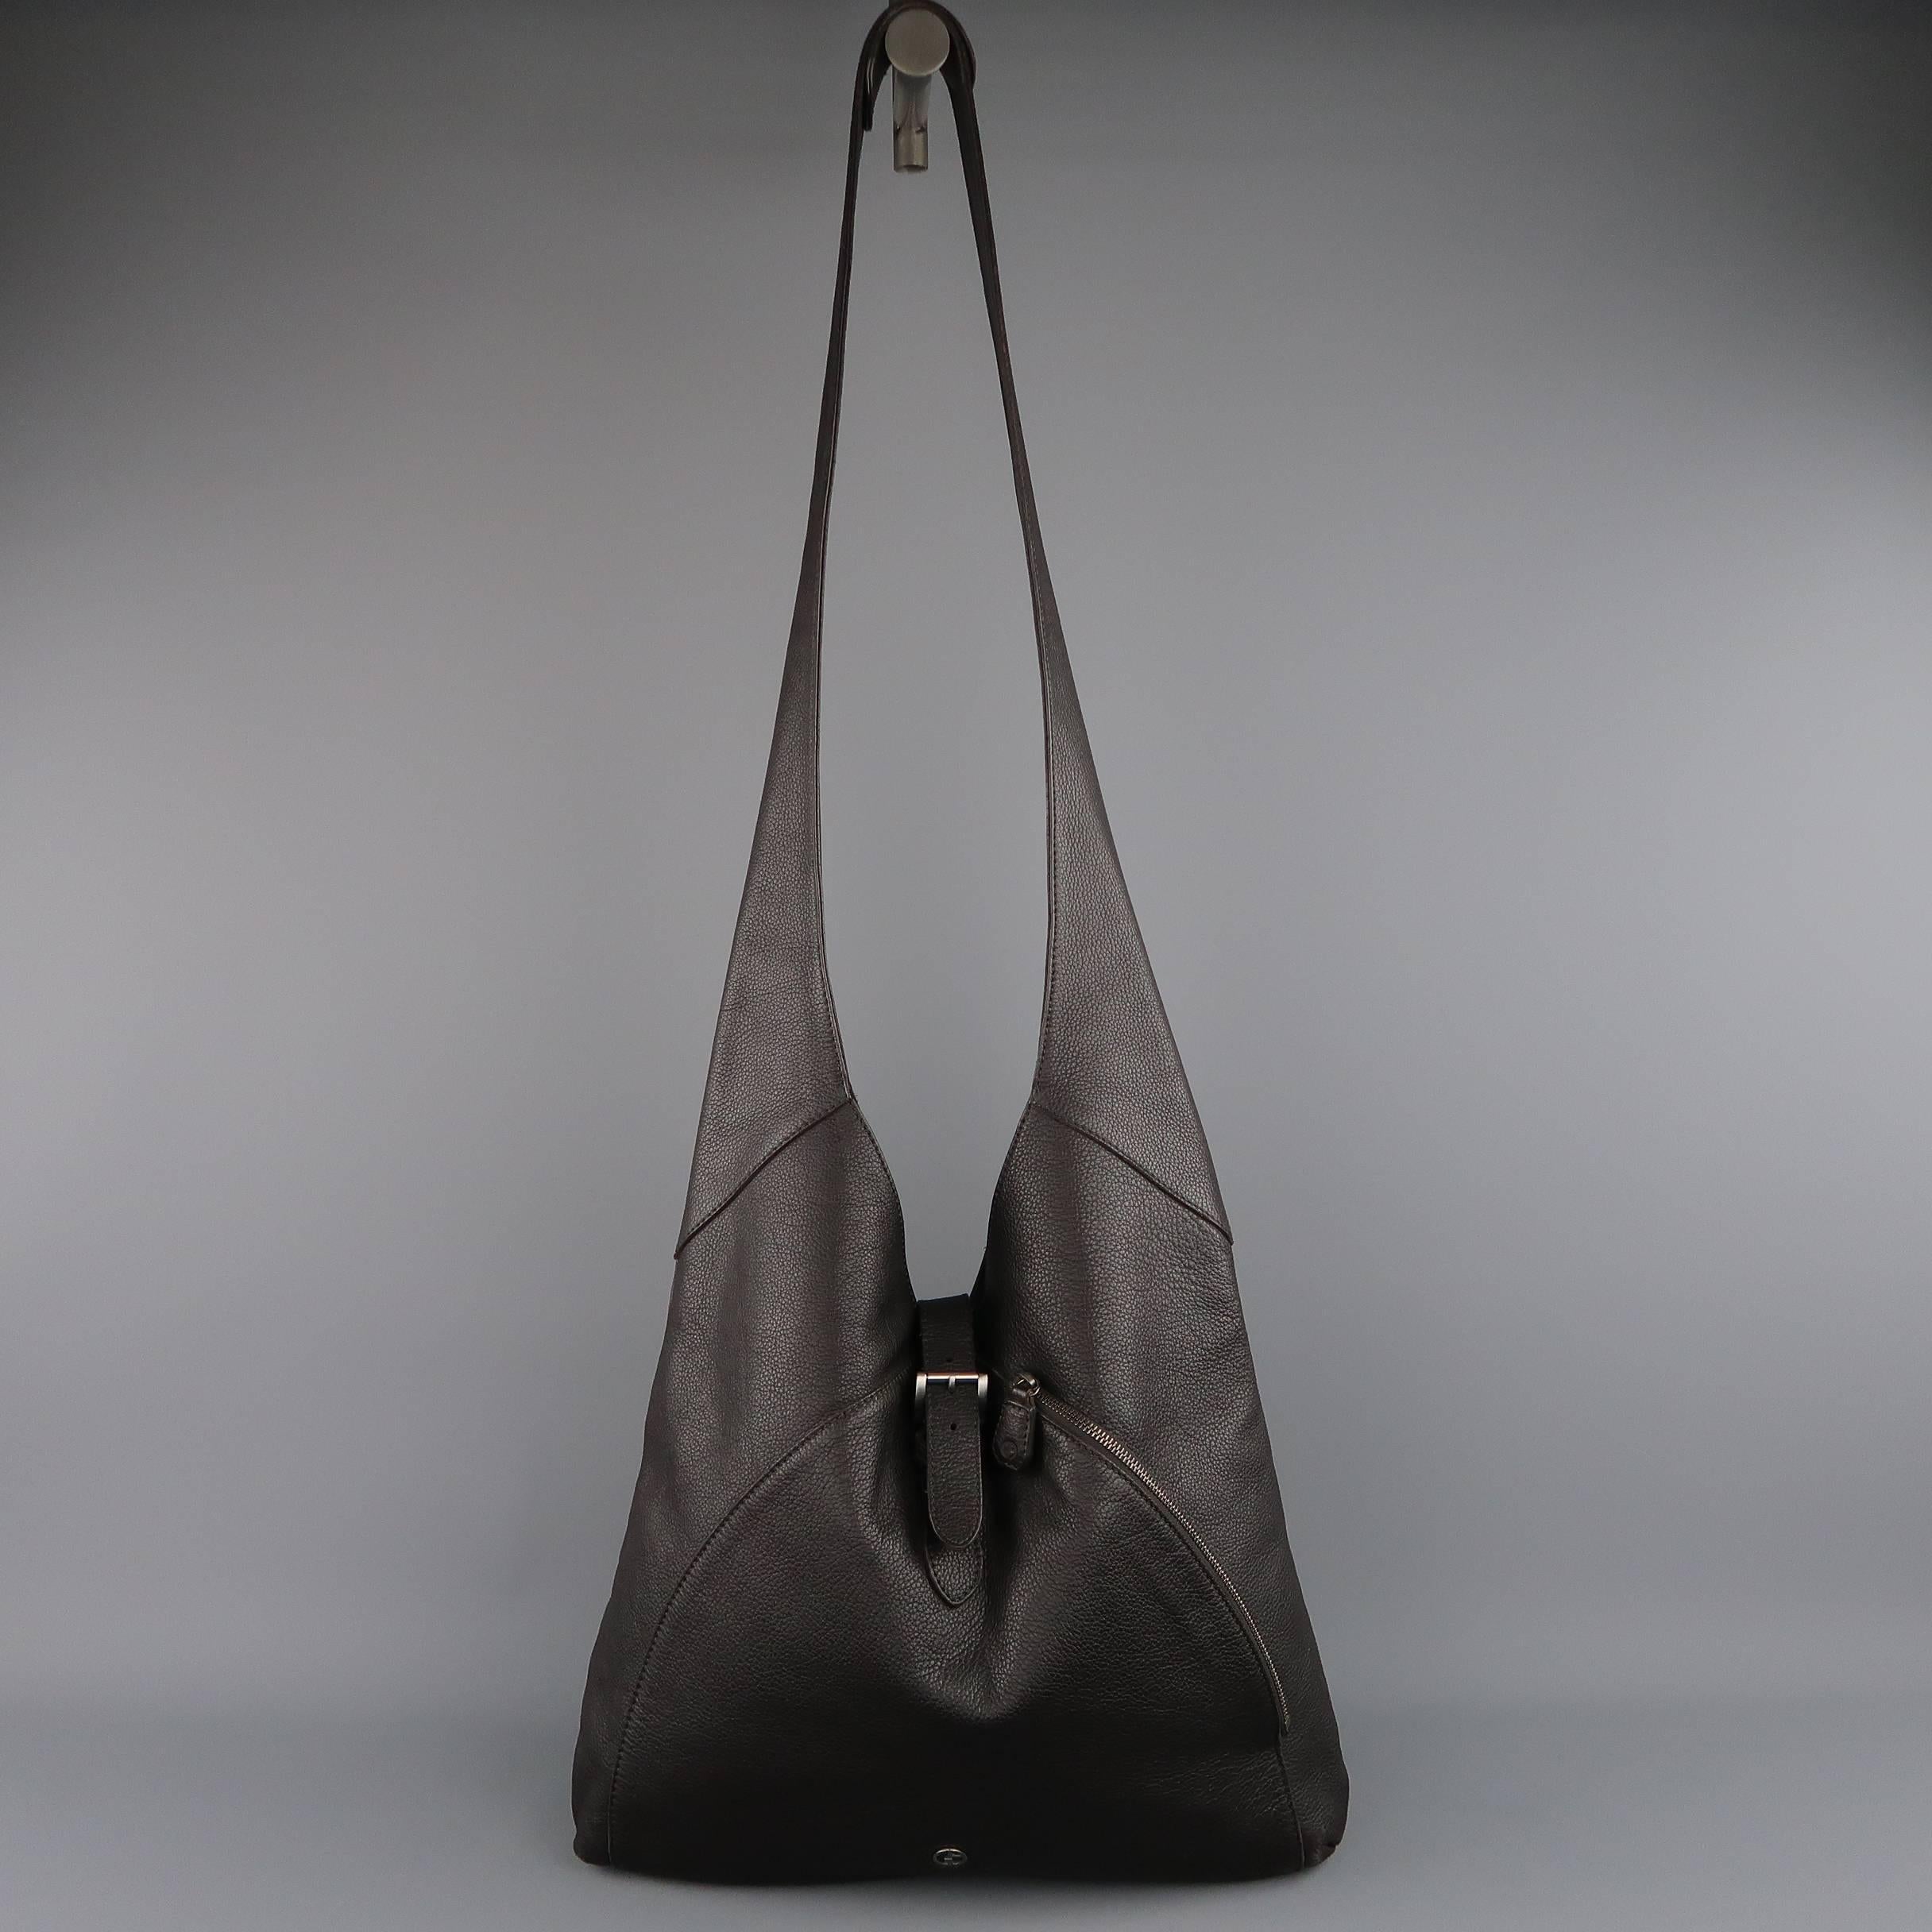 GIORGIO ARMANI bag comes in rich brown textured leather an features a silver tone logo plaque, side zip pocket, long shoulder crossbody strap and top buckle strap closure. Made in Italy.
 
Excellent Pre-Owned Condition.
 
Measurements:
 
Length: 15